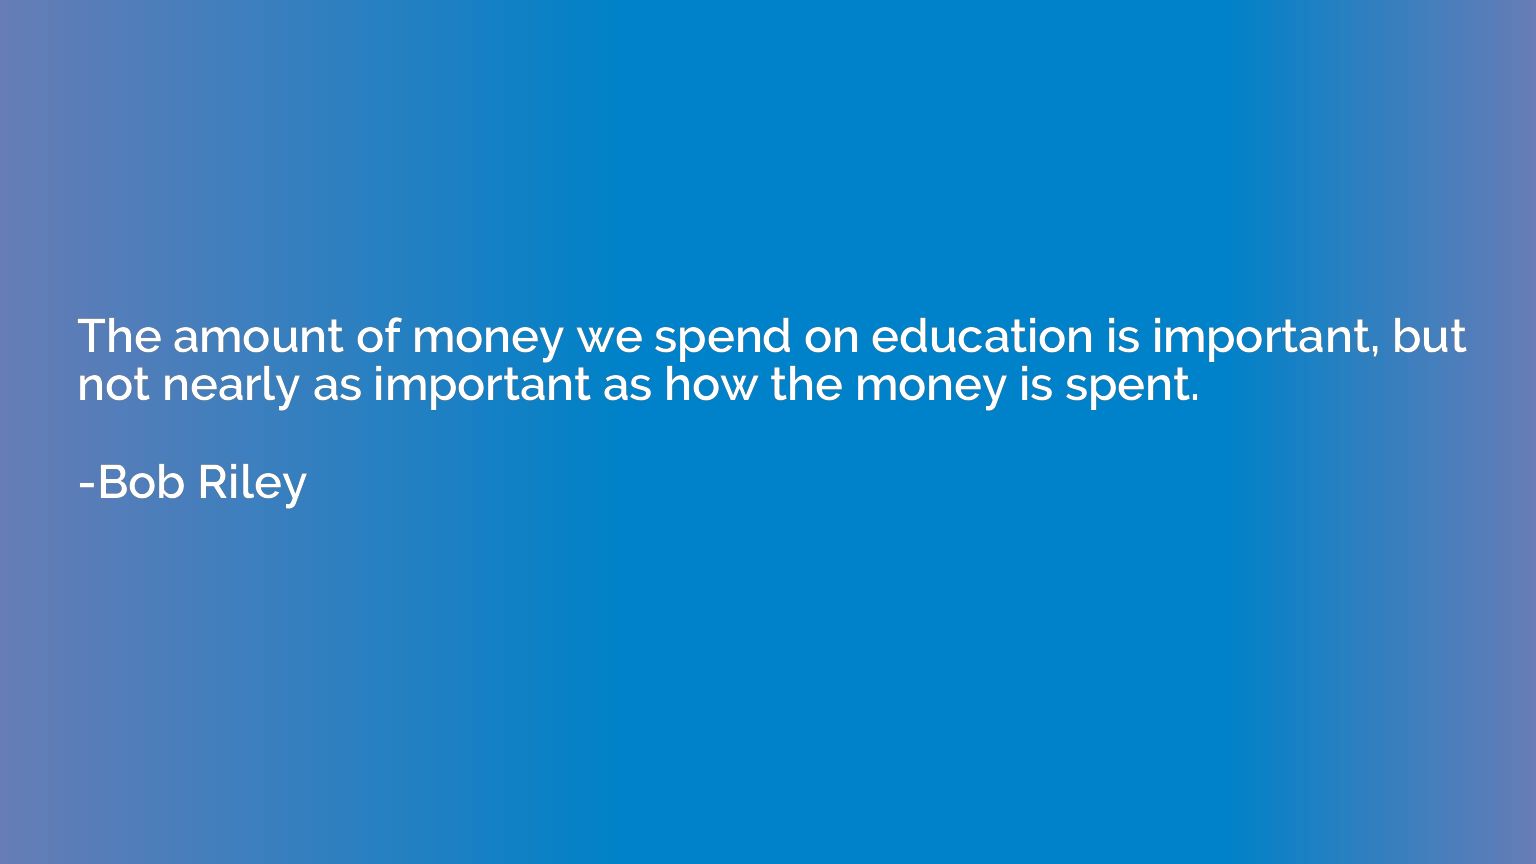 The amount of money we spend on education is important, but 